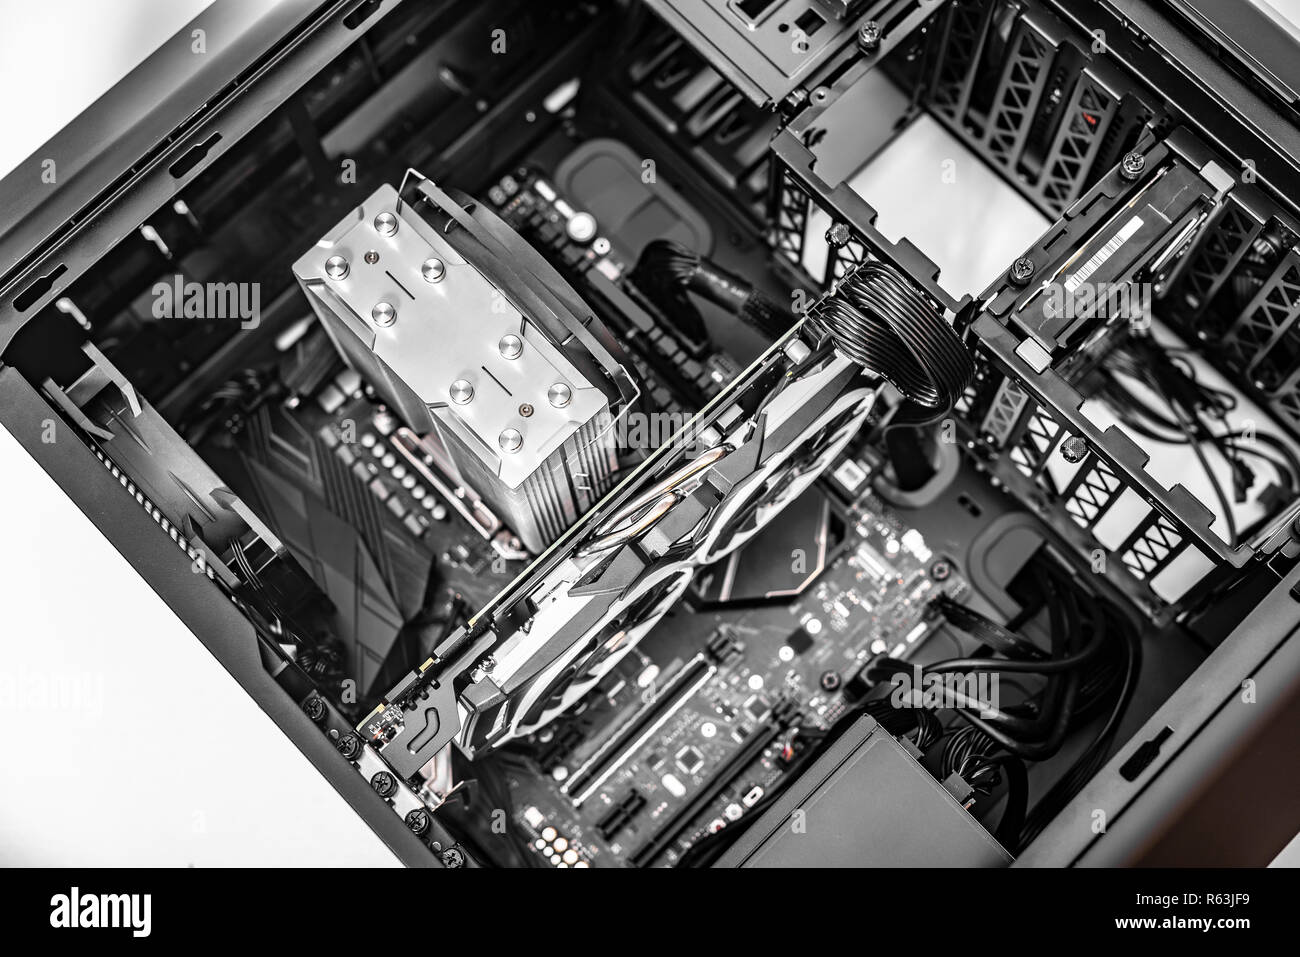 PC system unit. Components of the computer at the time of assembly of the PC. Stock Photo